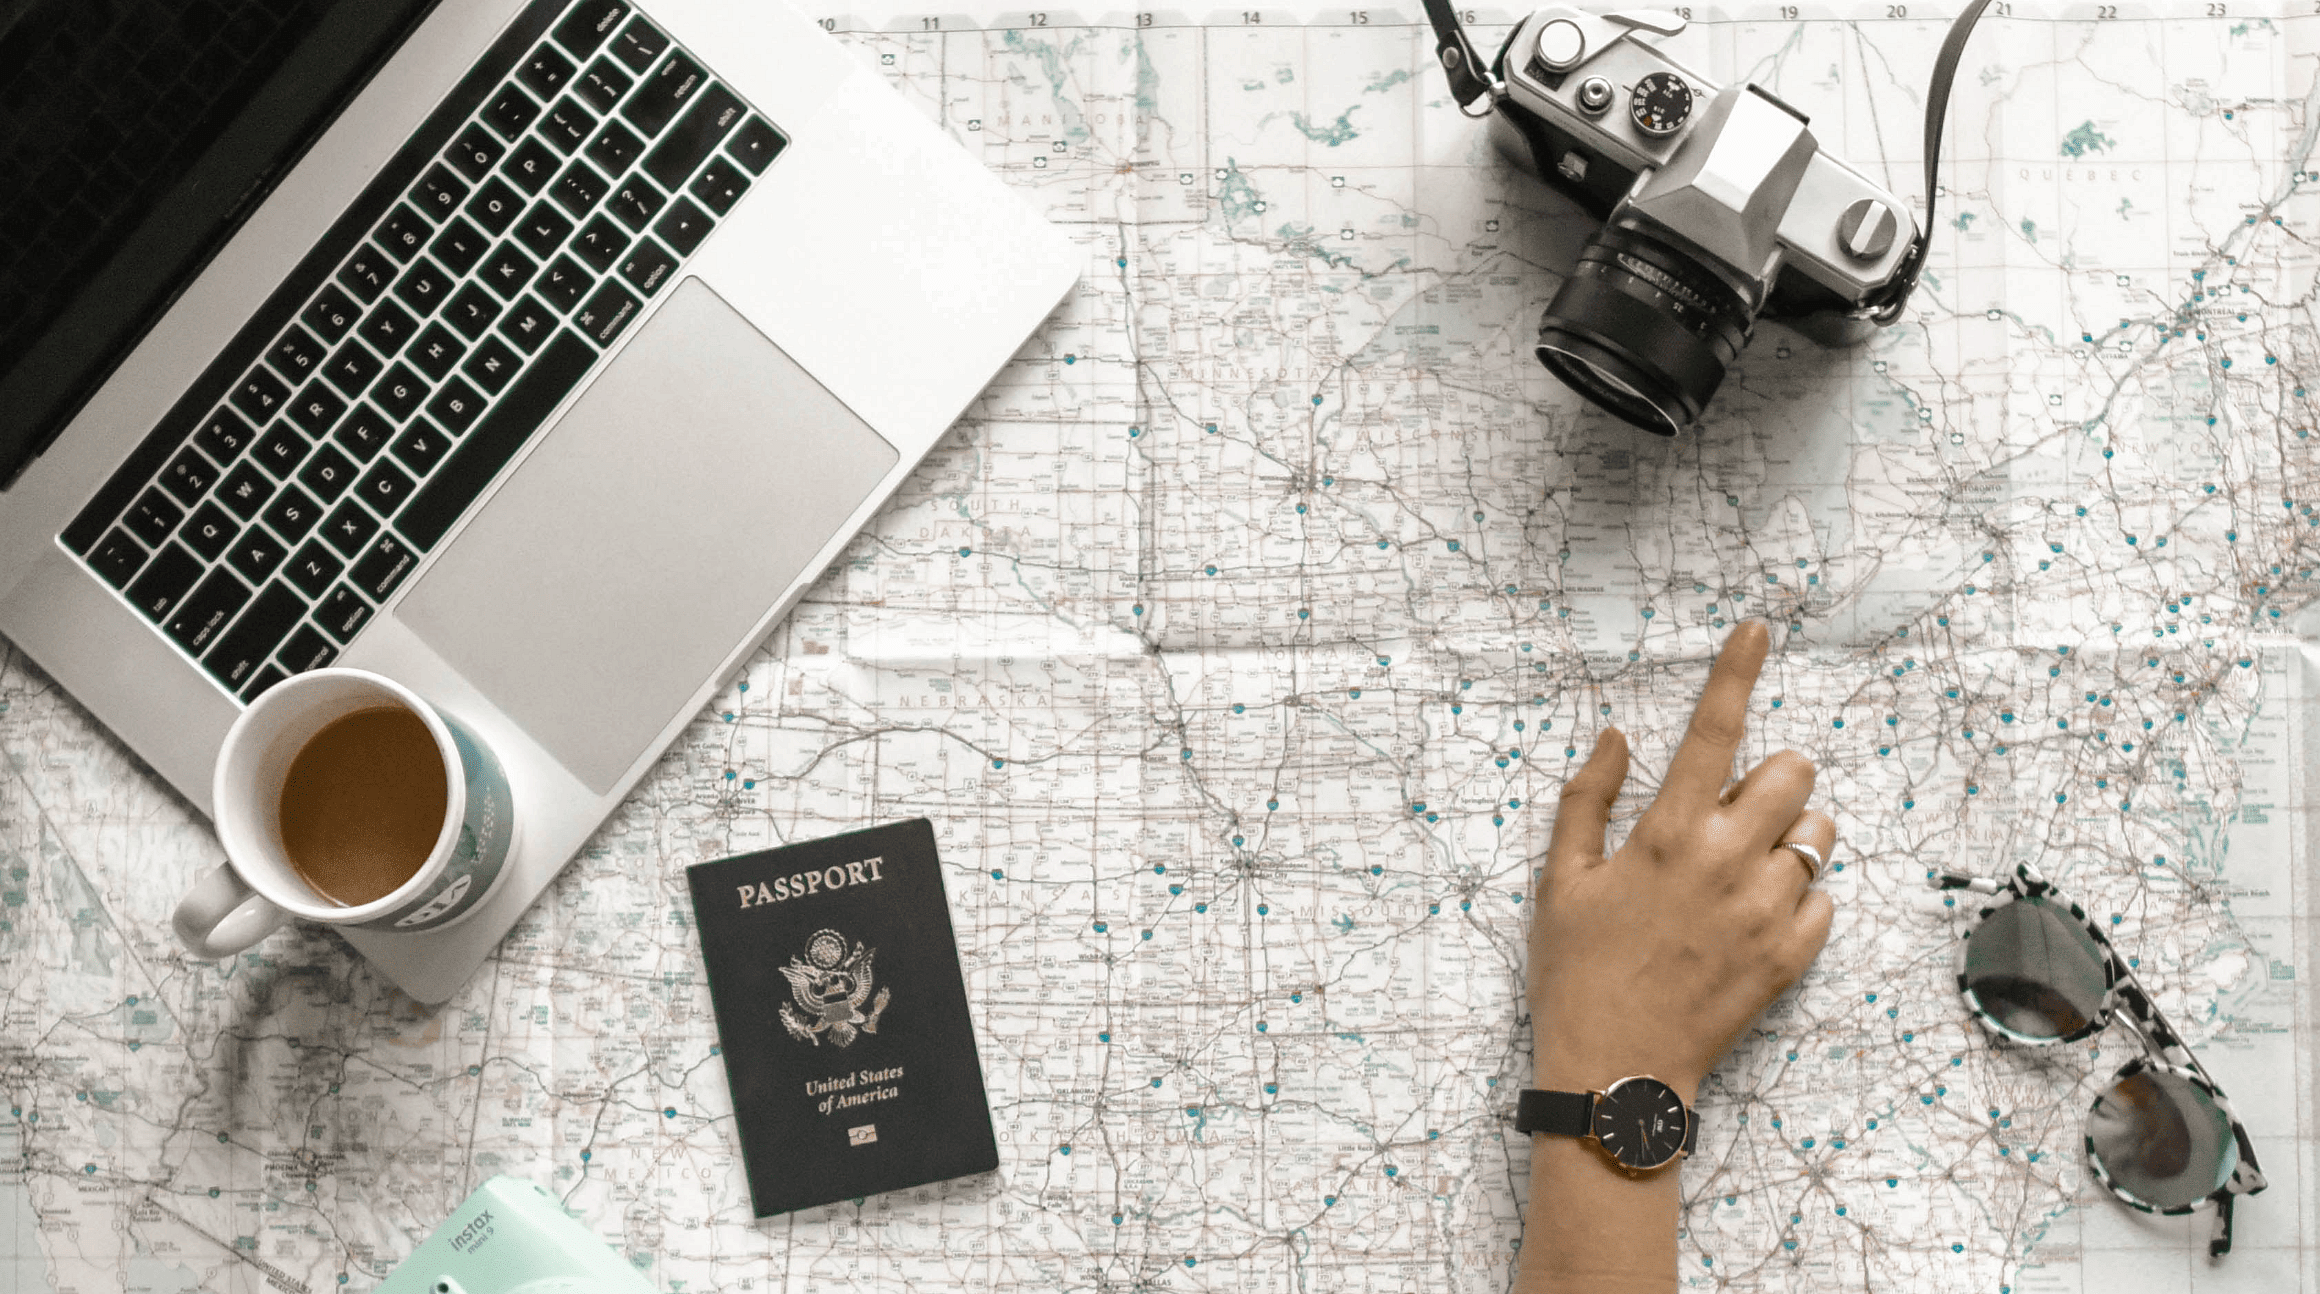 travel planning with world map, computer, camera, and passport